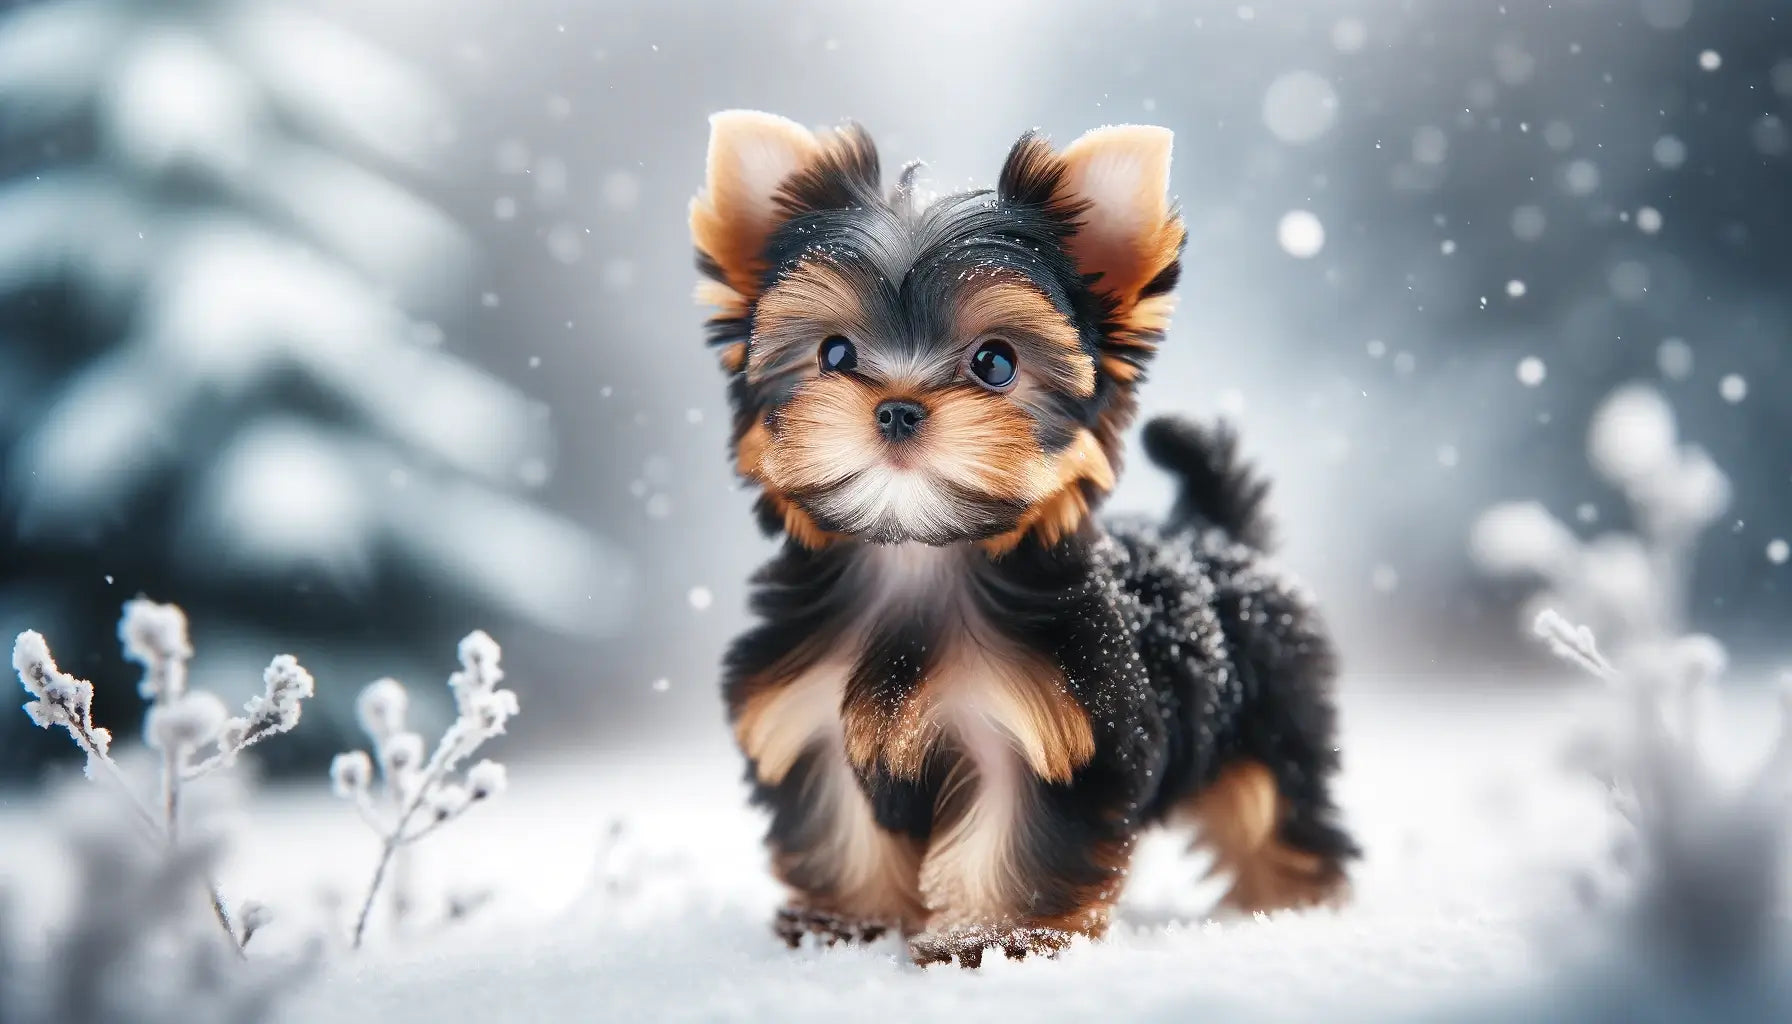 A Teacup Yorkie stands confidently on a snowy backdrop.